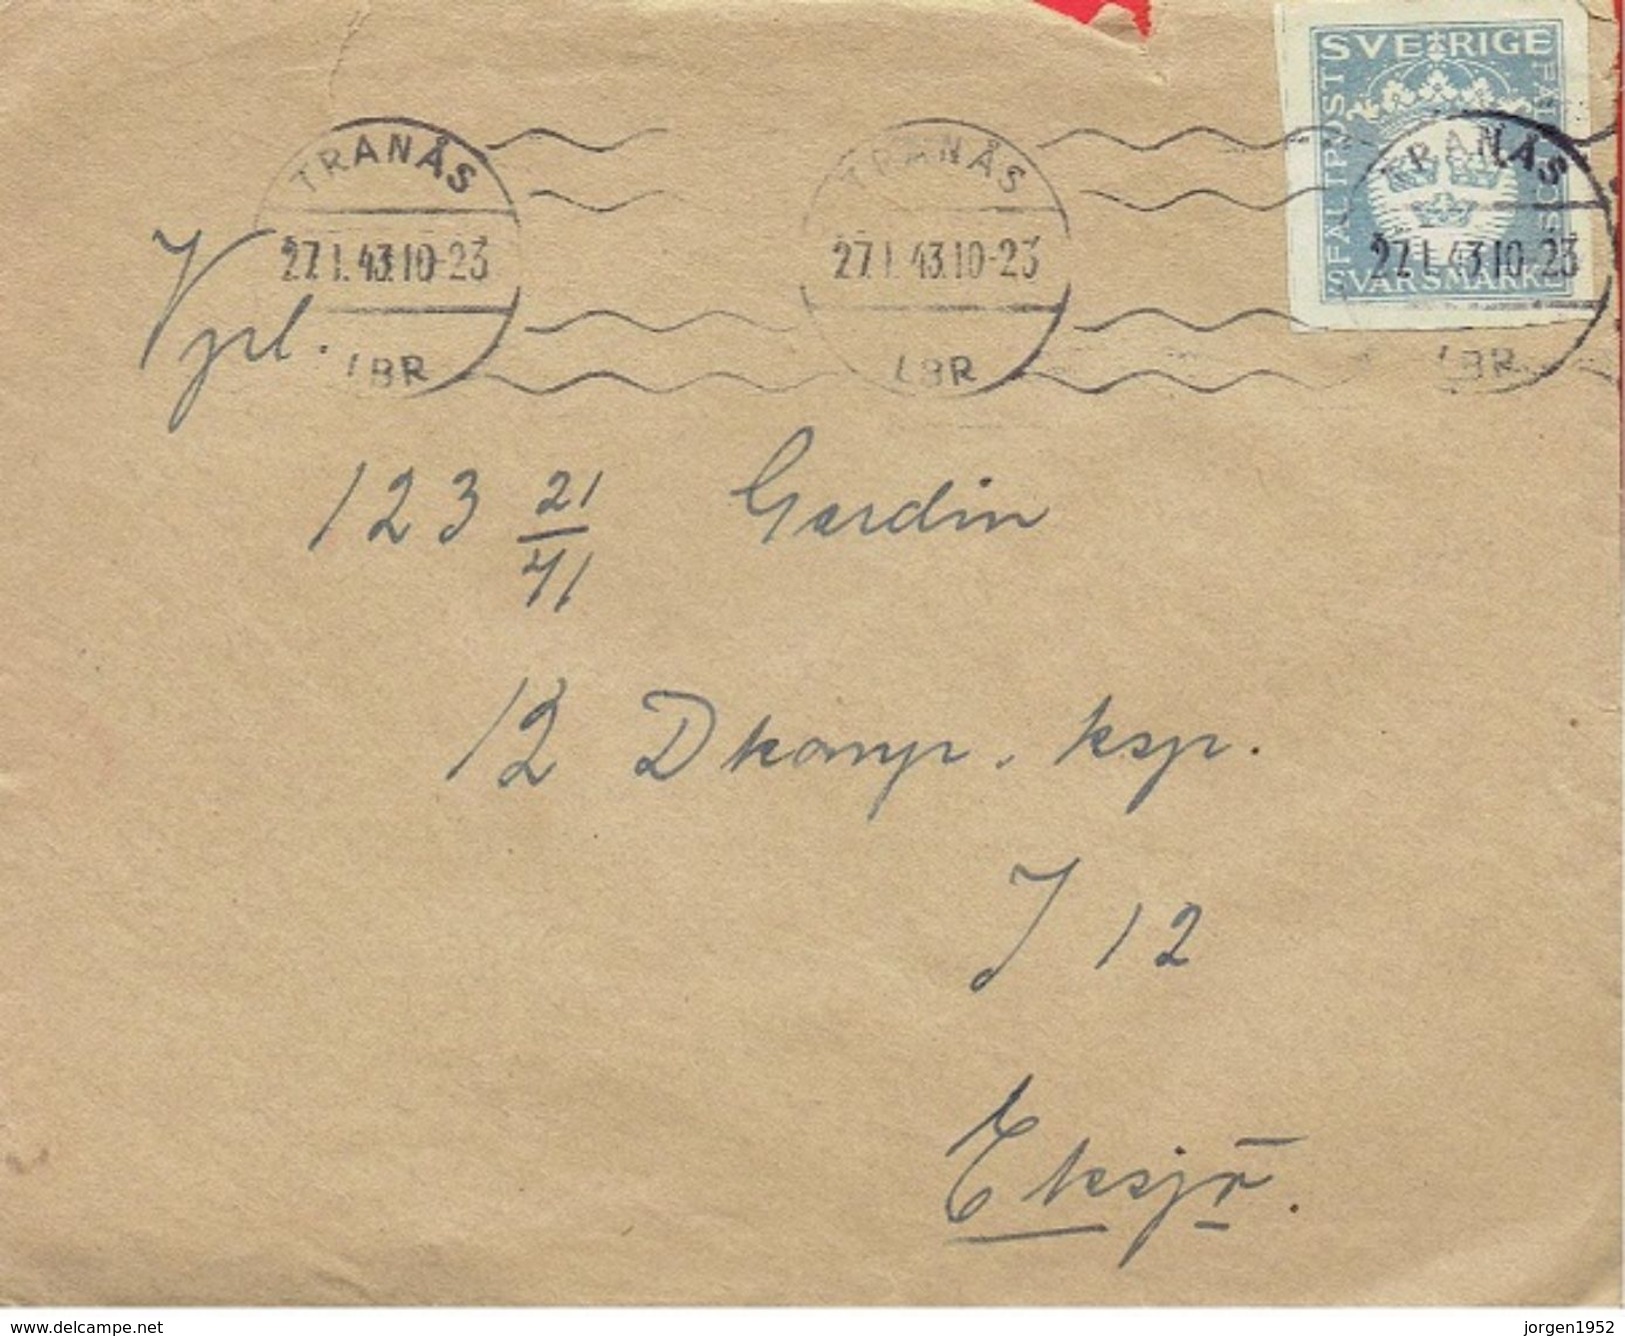 SWEDEN # MILITARY BRIEF   SEND FROM TRANÅS  27.1-1943 - Military